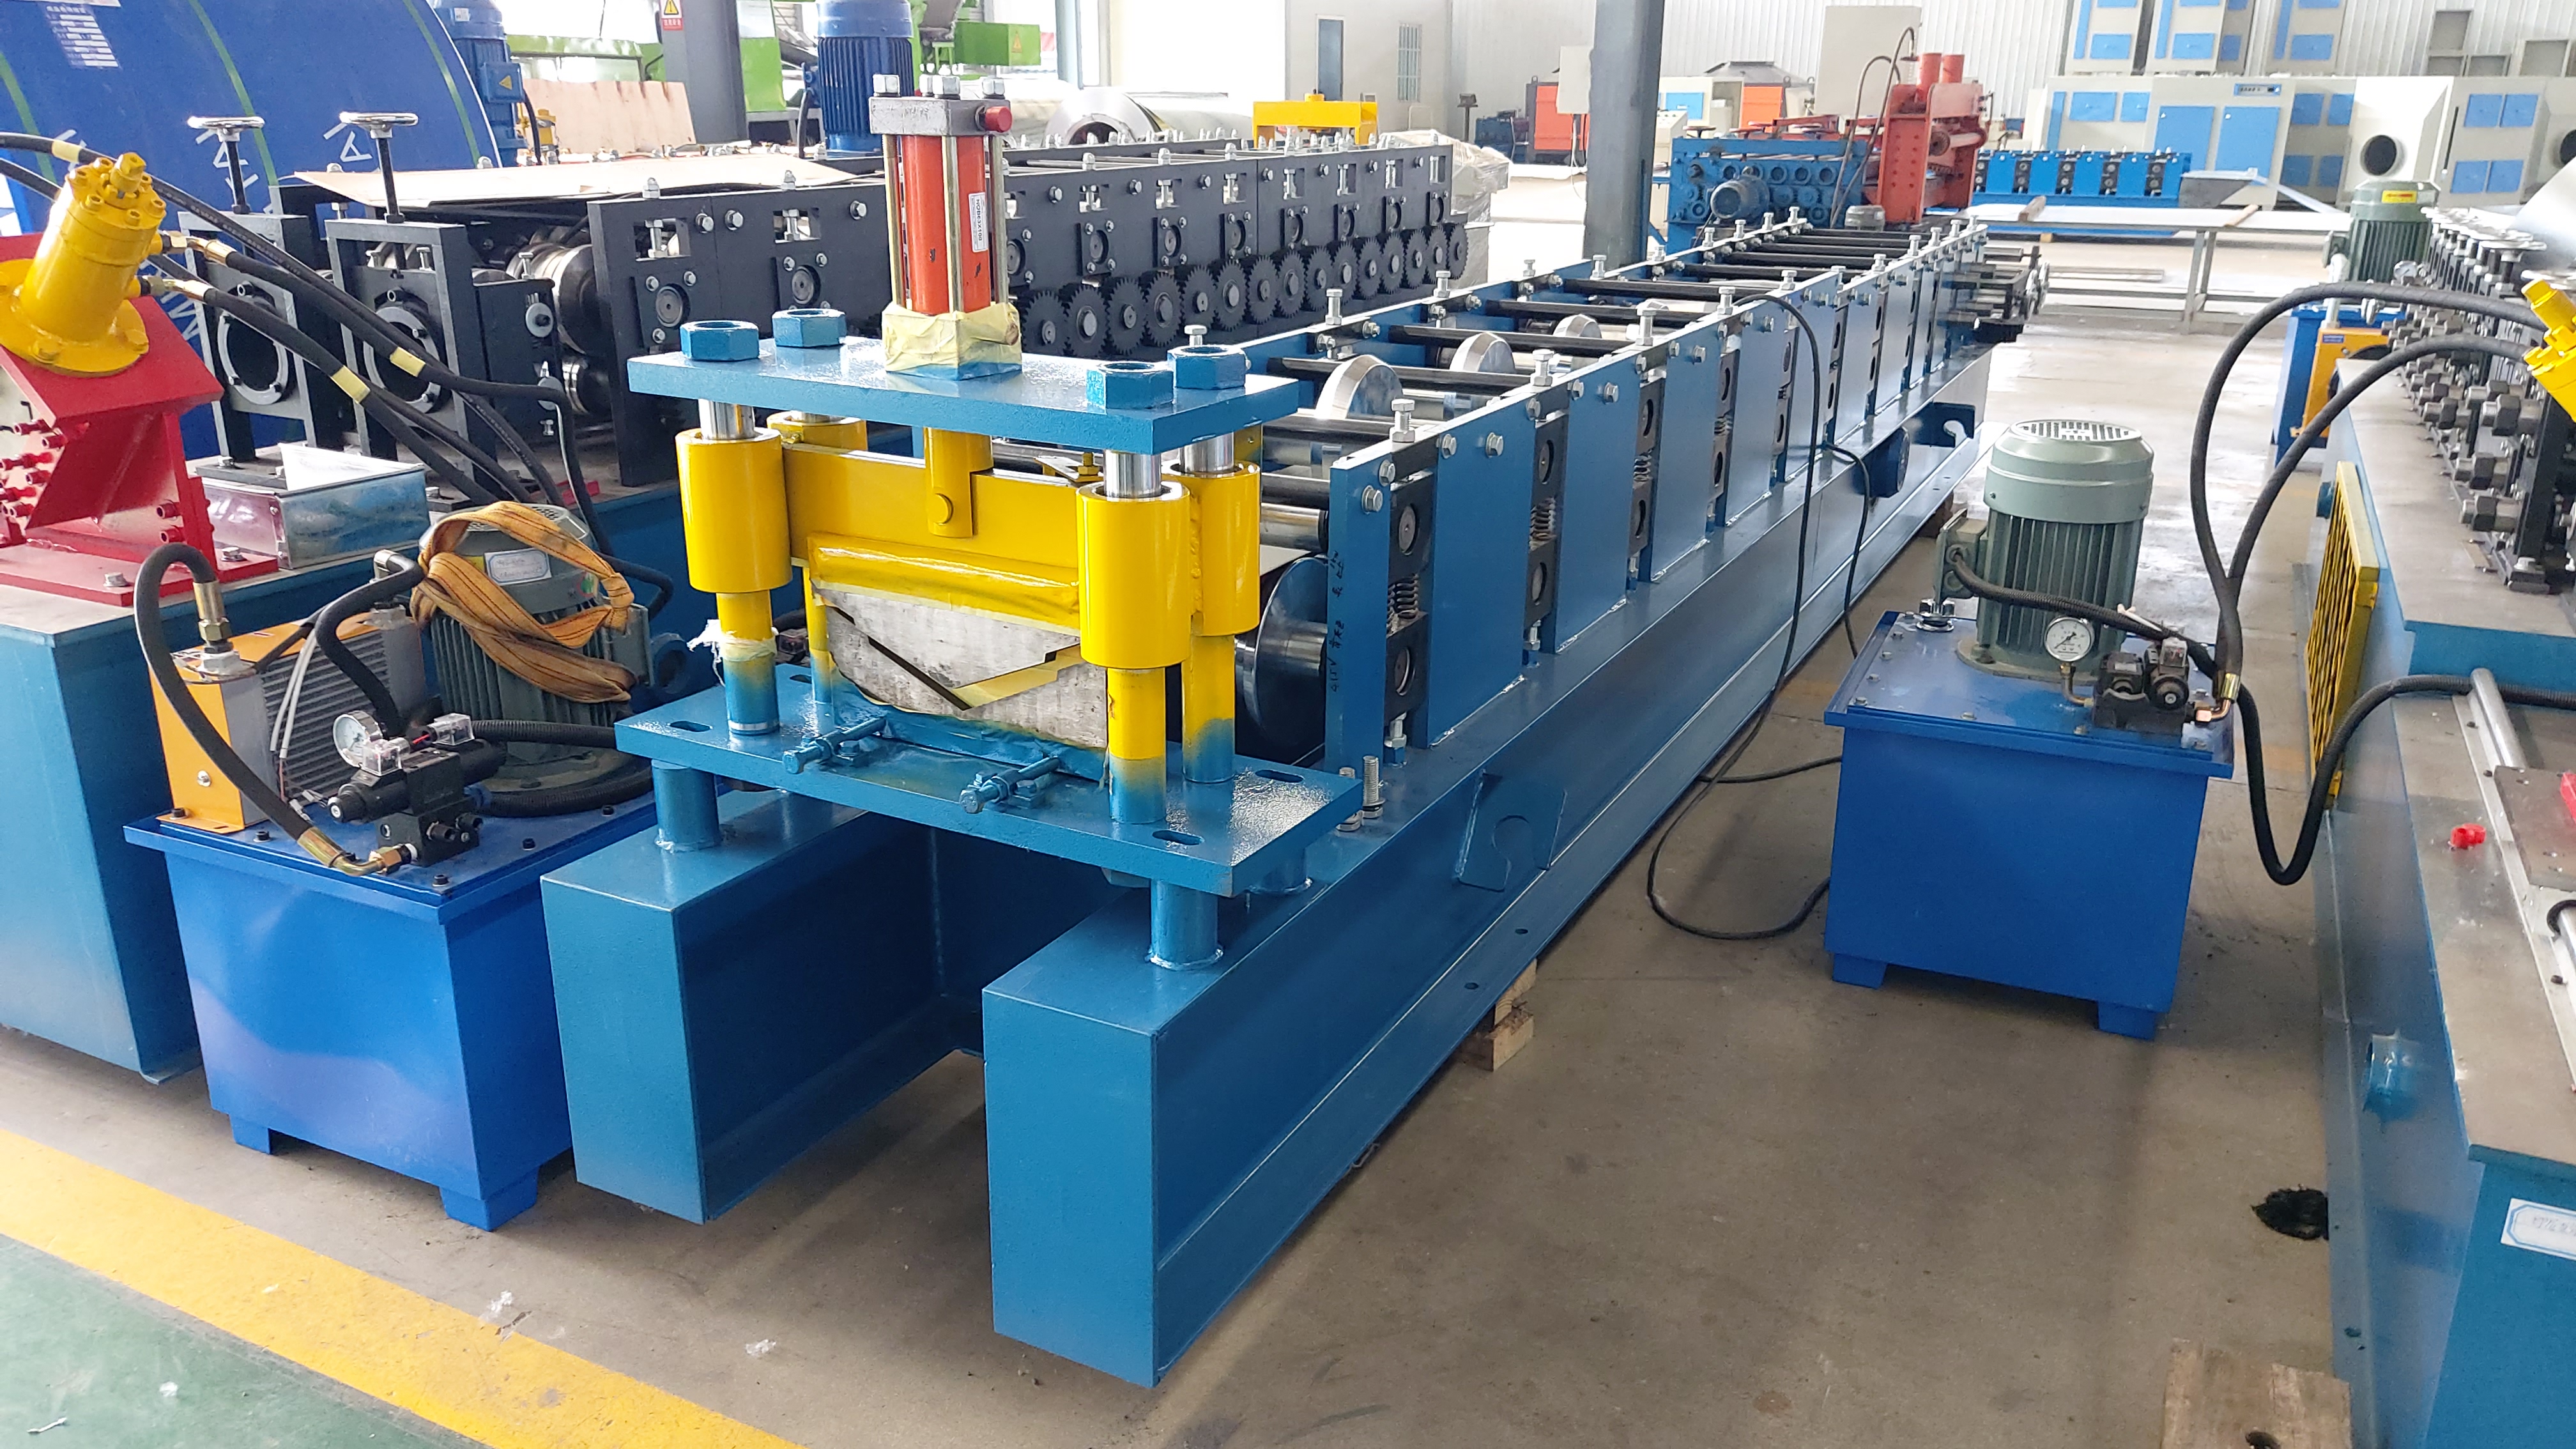 Kenya roof sheet roll forming machine has completed